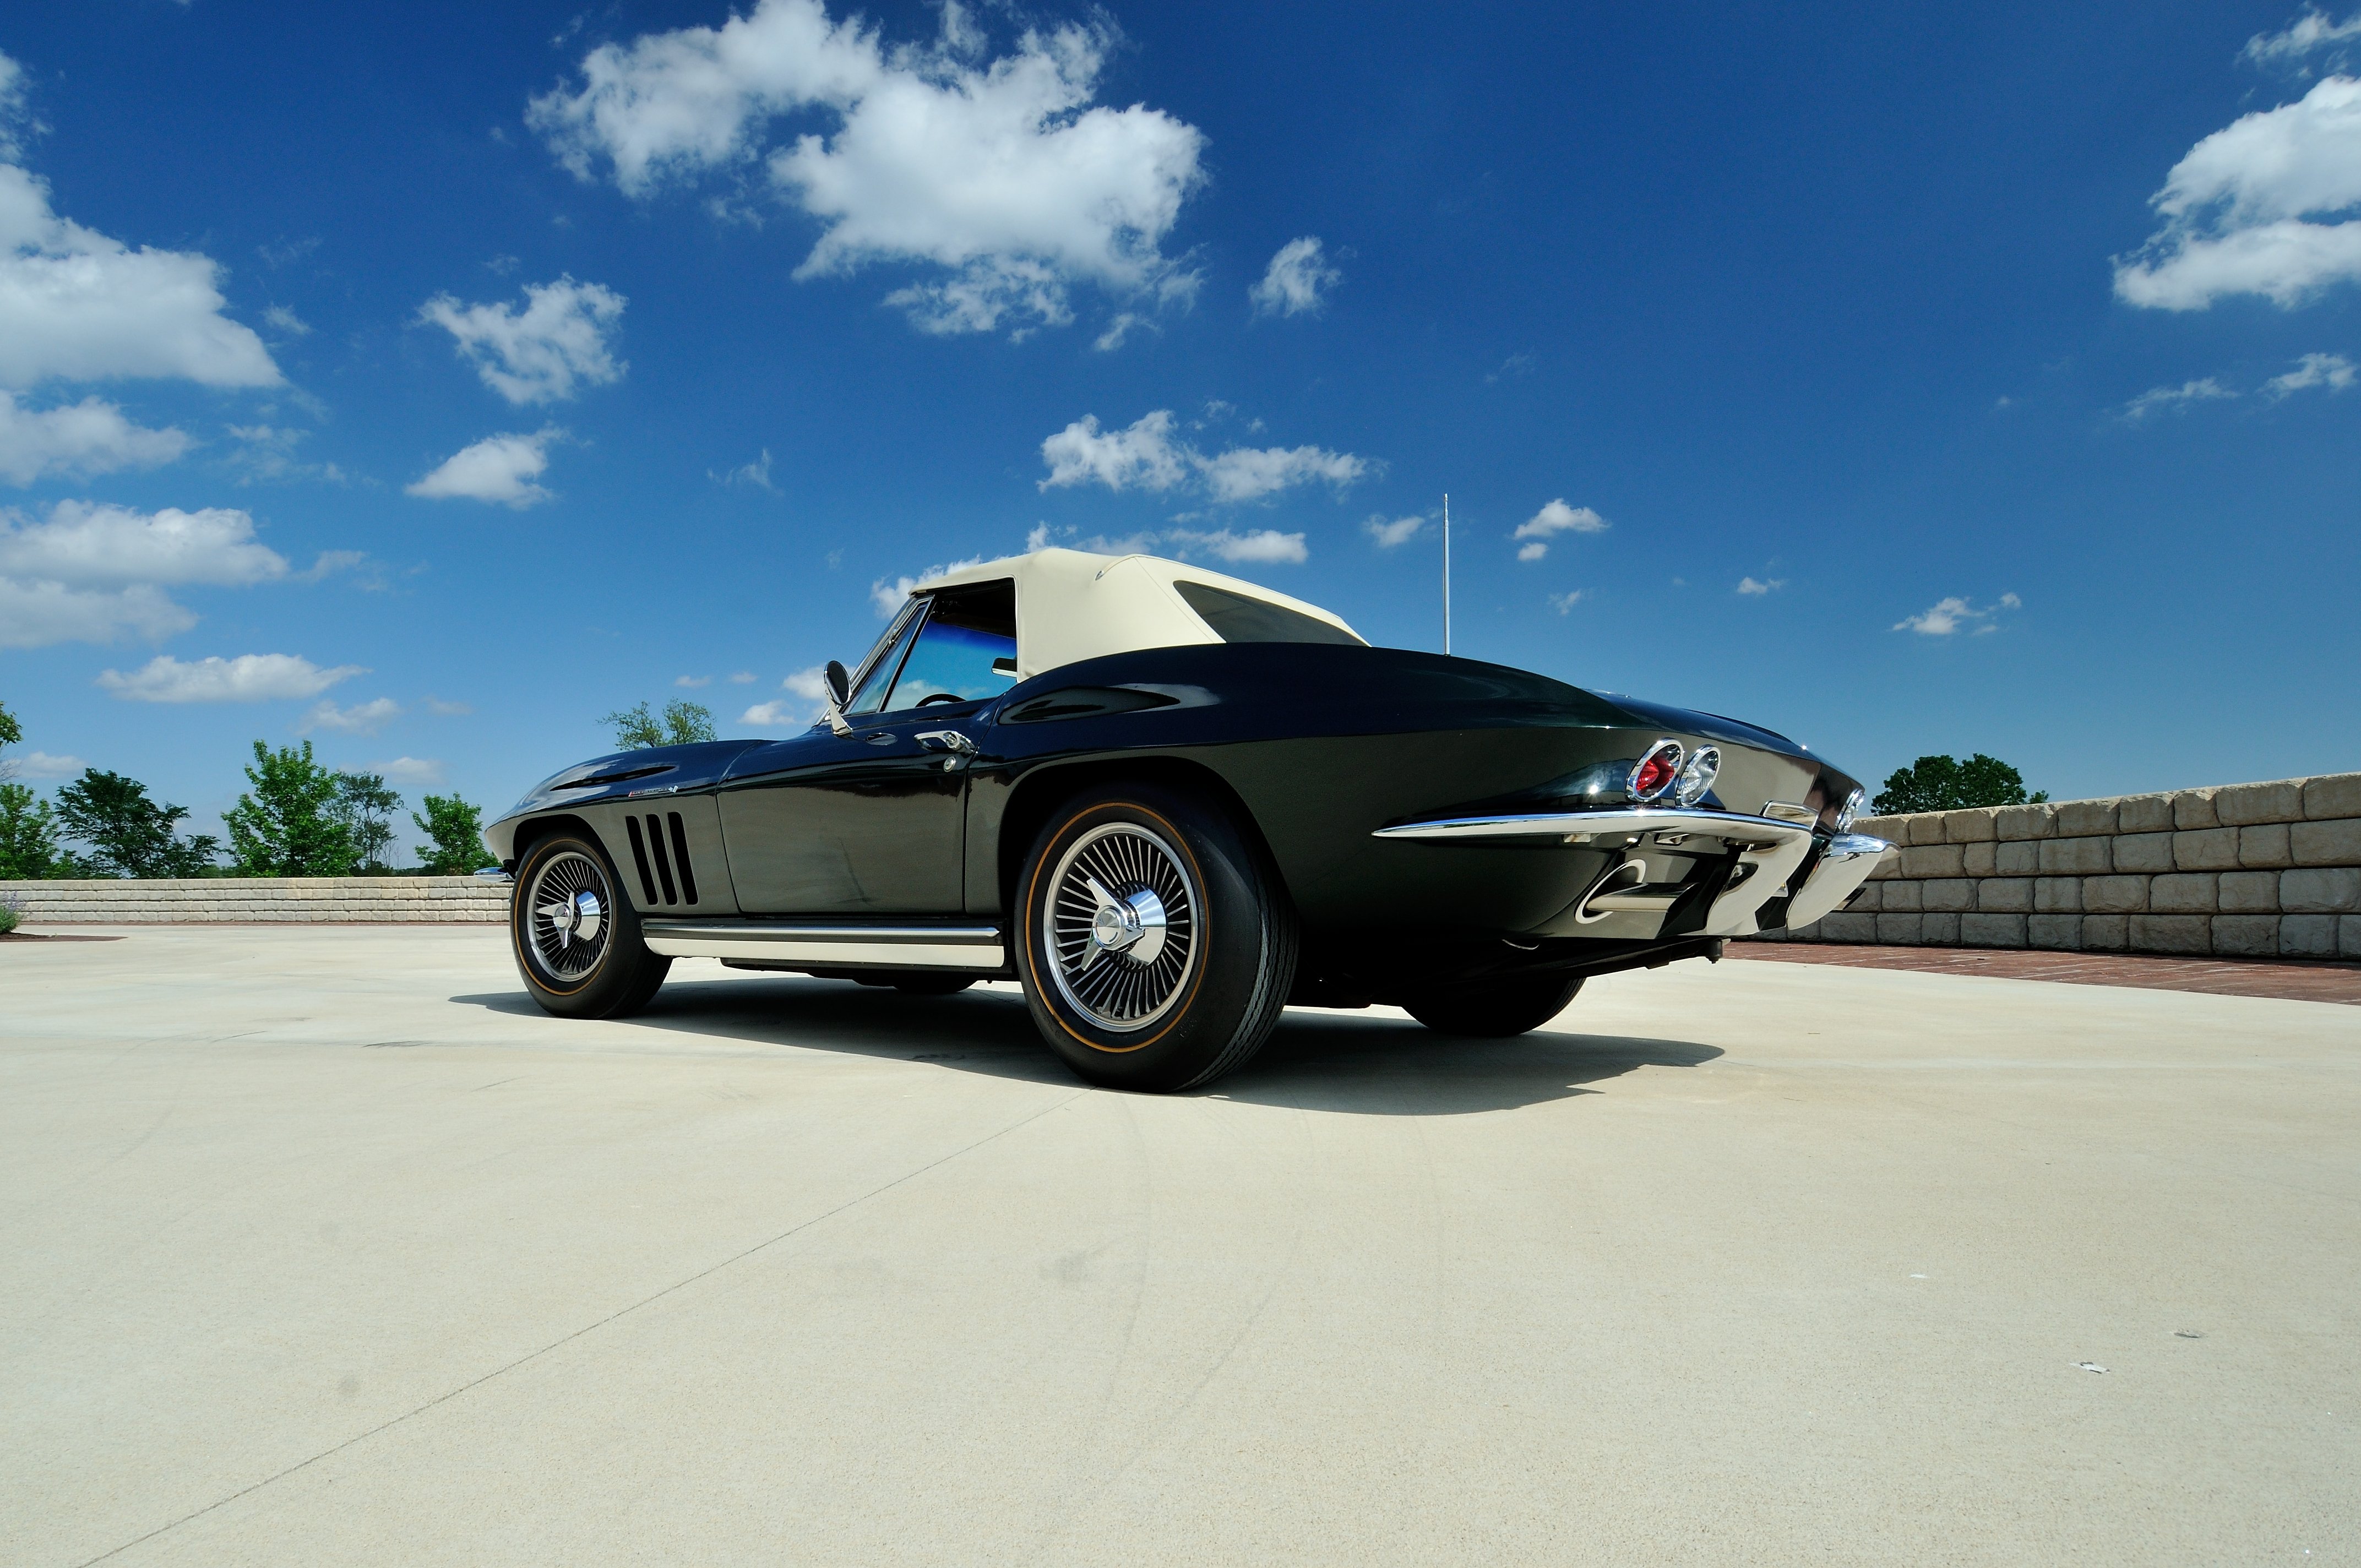 1965, Chevrolet, Corvette, Stingray, Ating, Ray, Muscle, Convertible, Classic, Old, Original, Usa,  42 Wallpaper